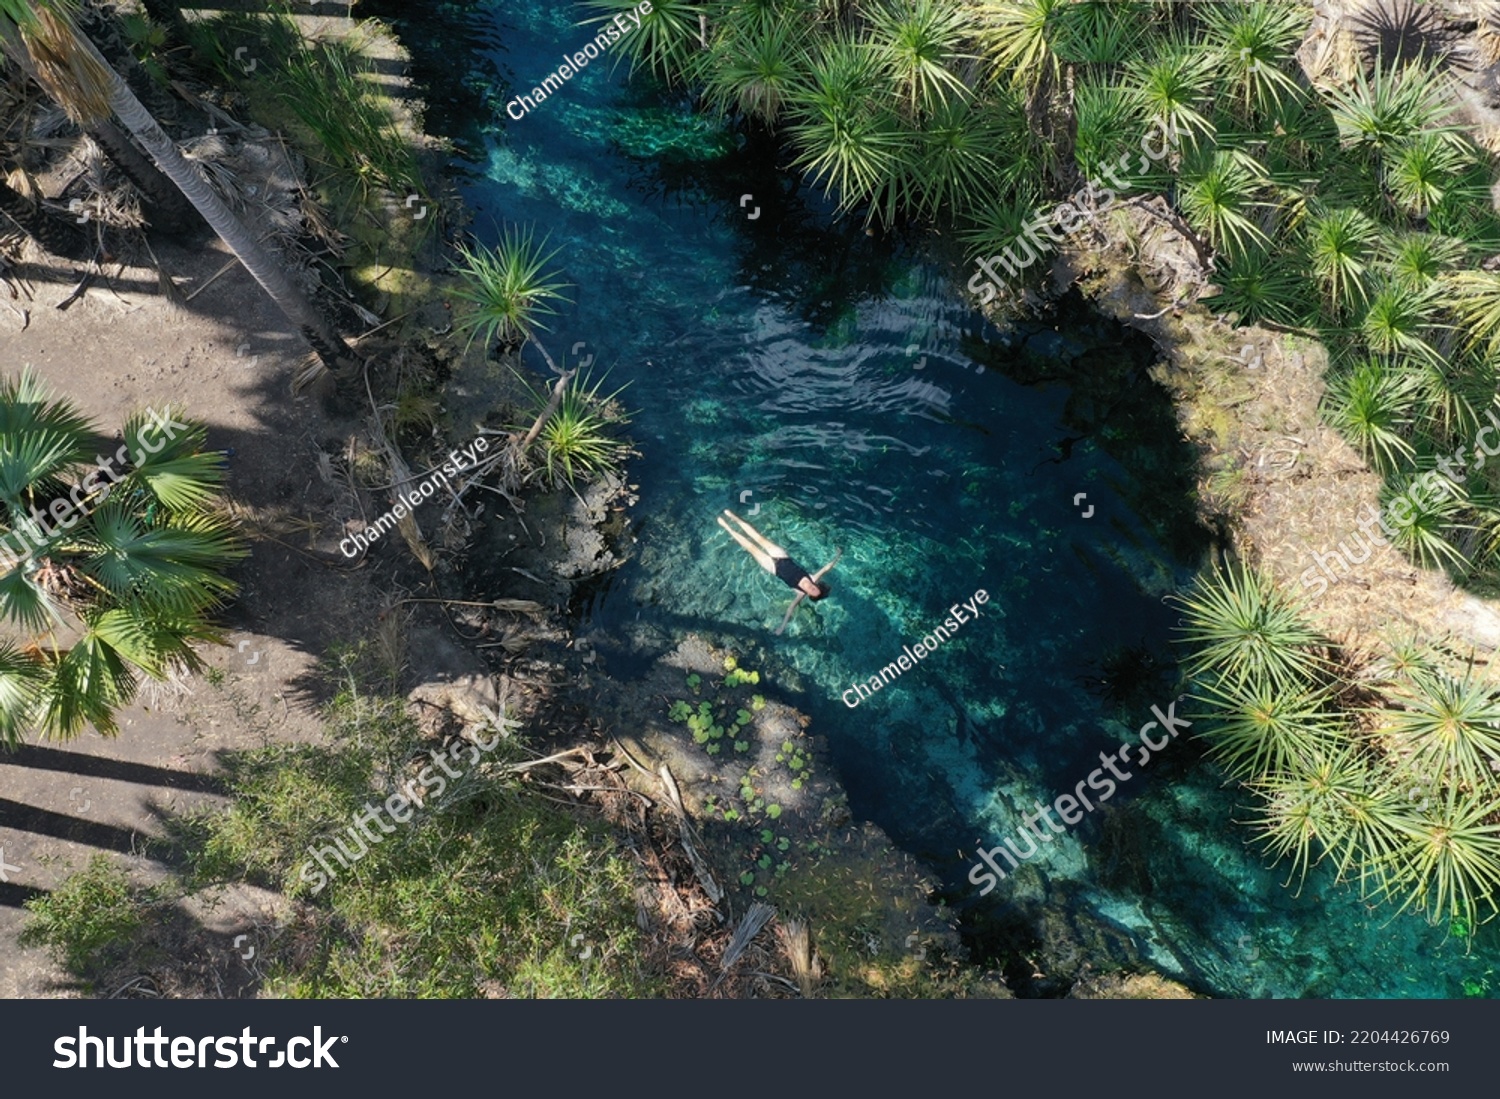 Aerial drone landscape view of young Australian tourist woman swimming in Bitter Springs natural thermal hot pools in the Northern Territory of Australia. #2204426769